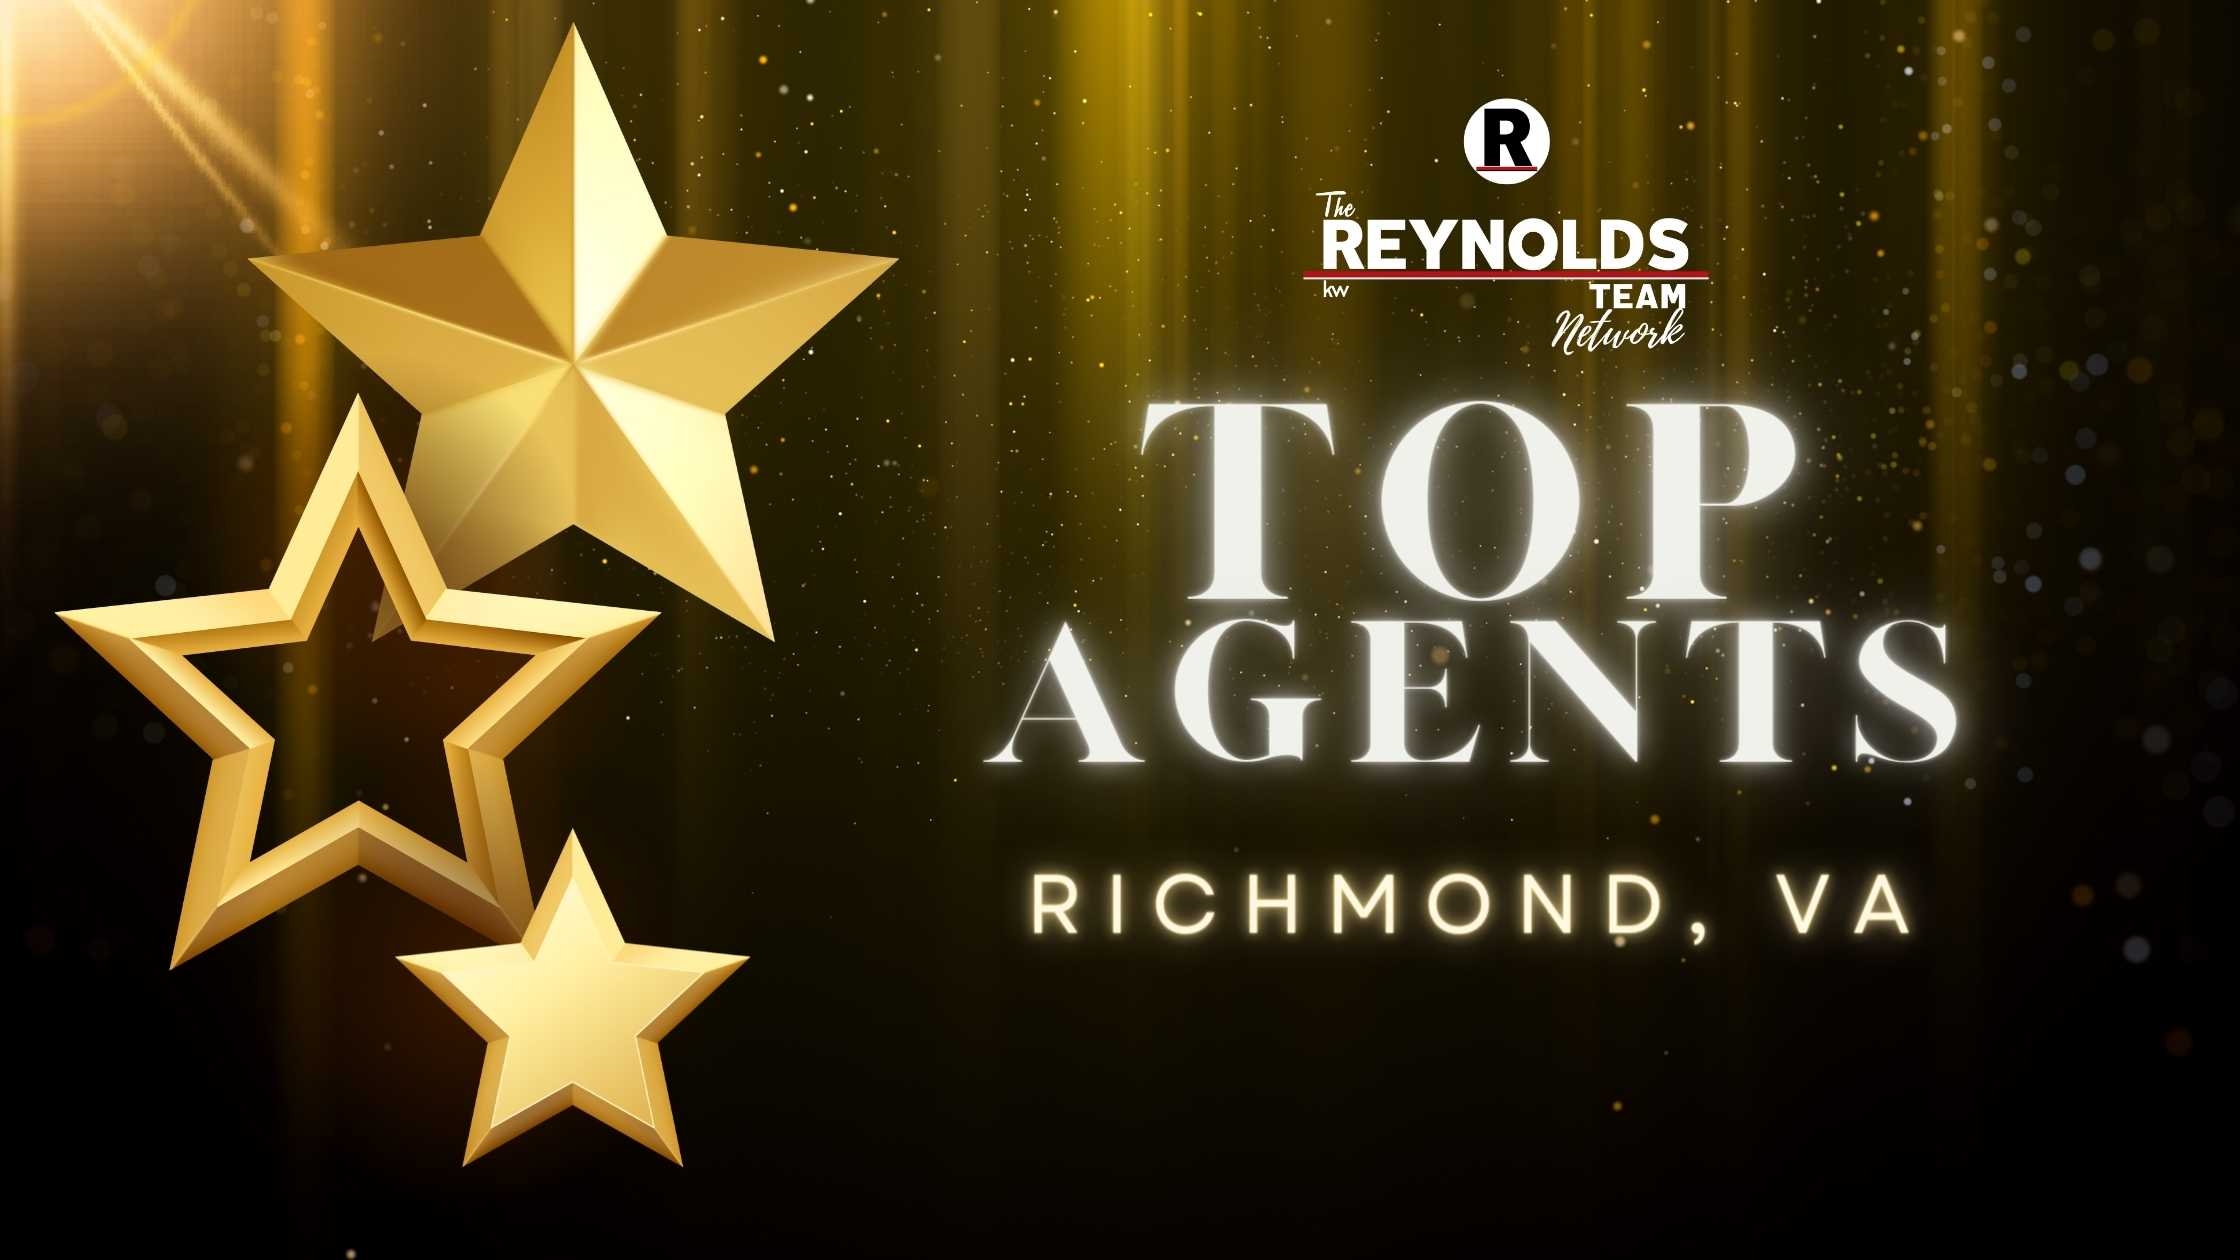 Congrats to The Top 20 Agents in Richmond, VA!